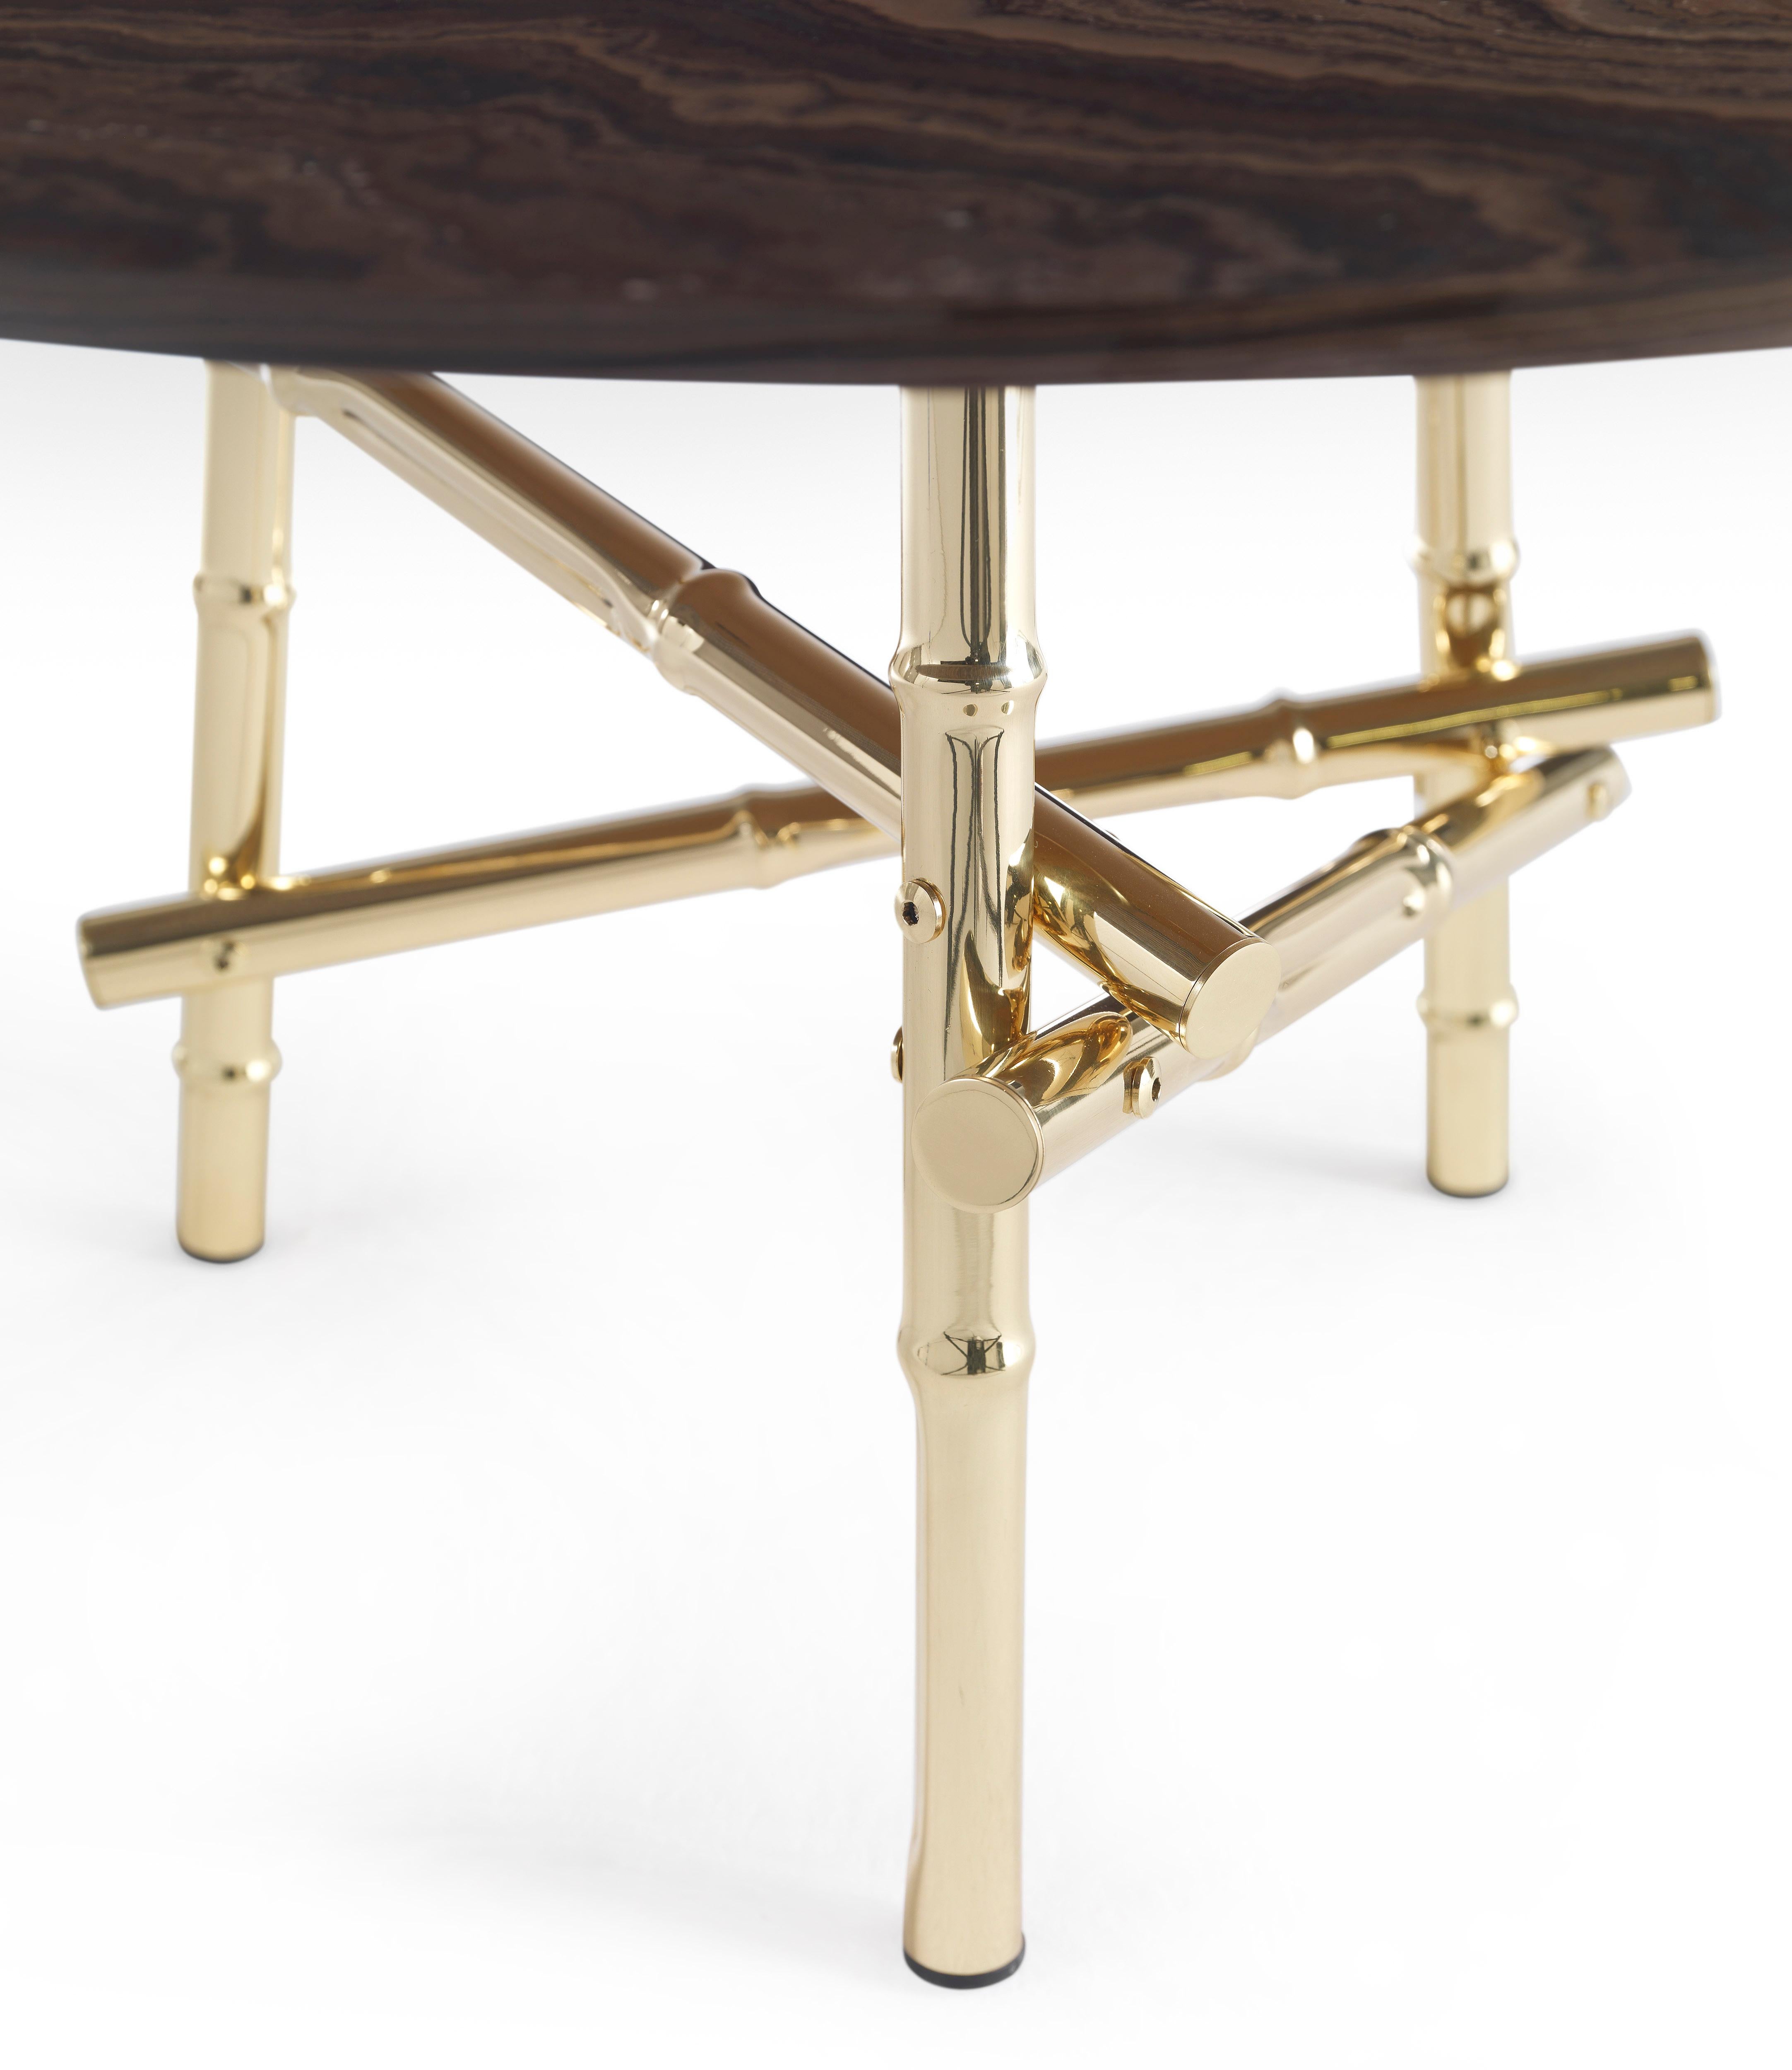 Italian 21st Century Samarcanda Small Table in Brass and Marble by Etro Home Interiors For Sale